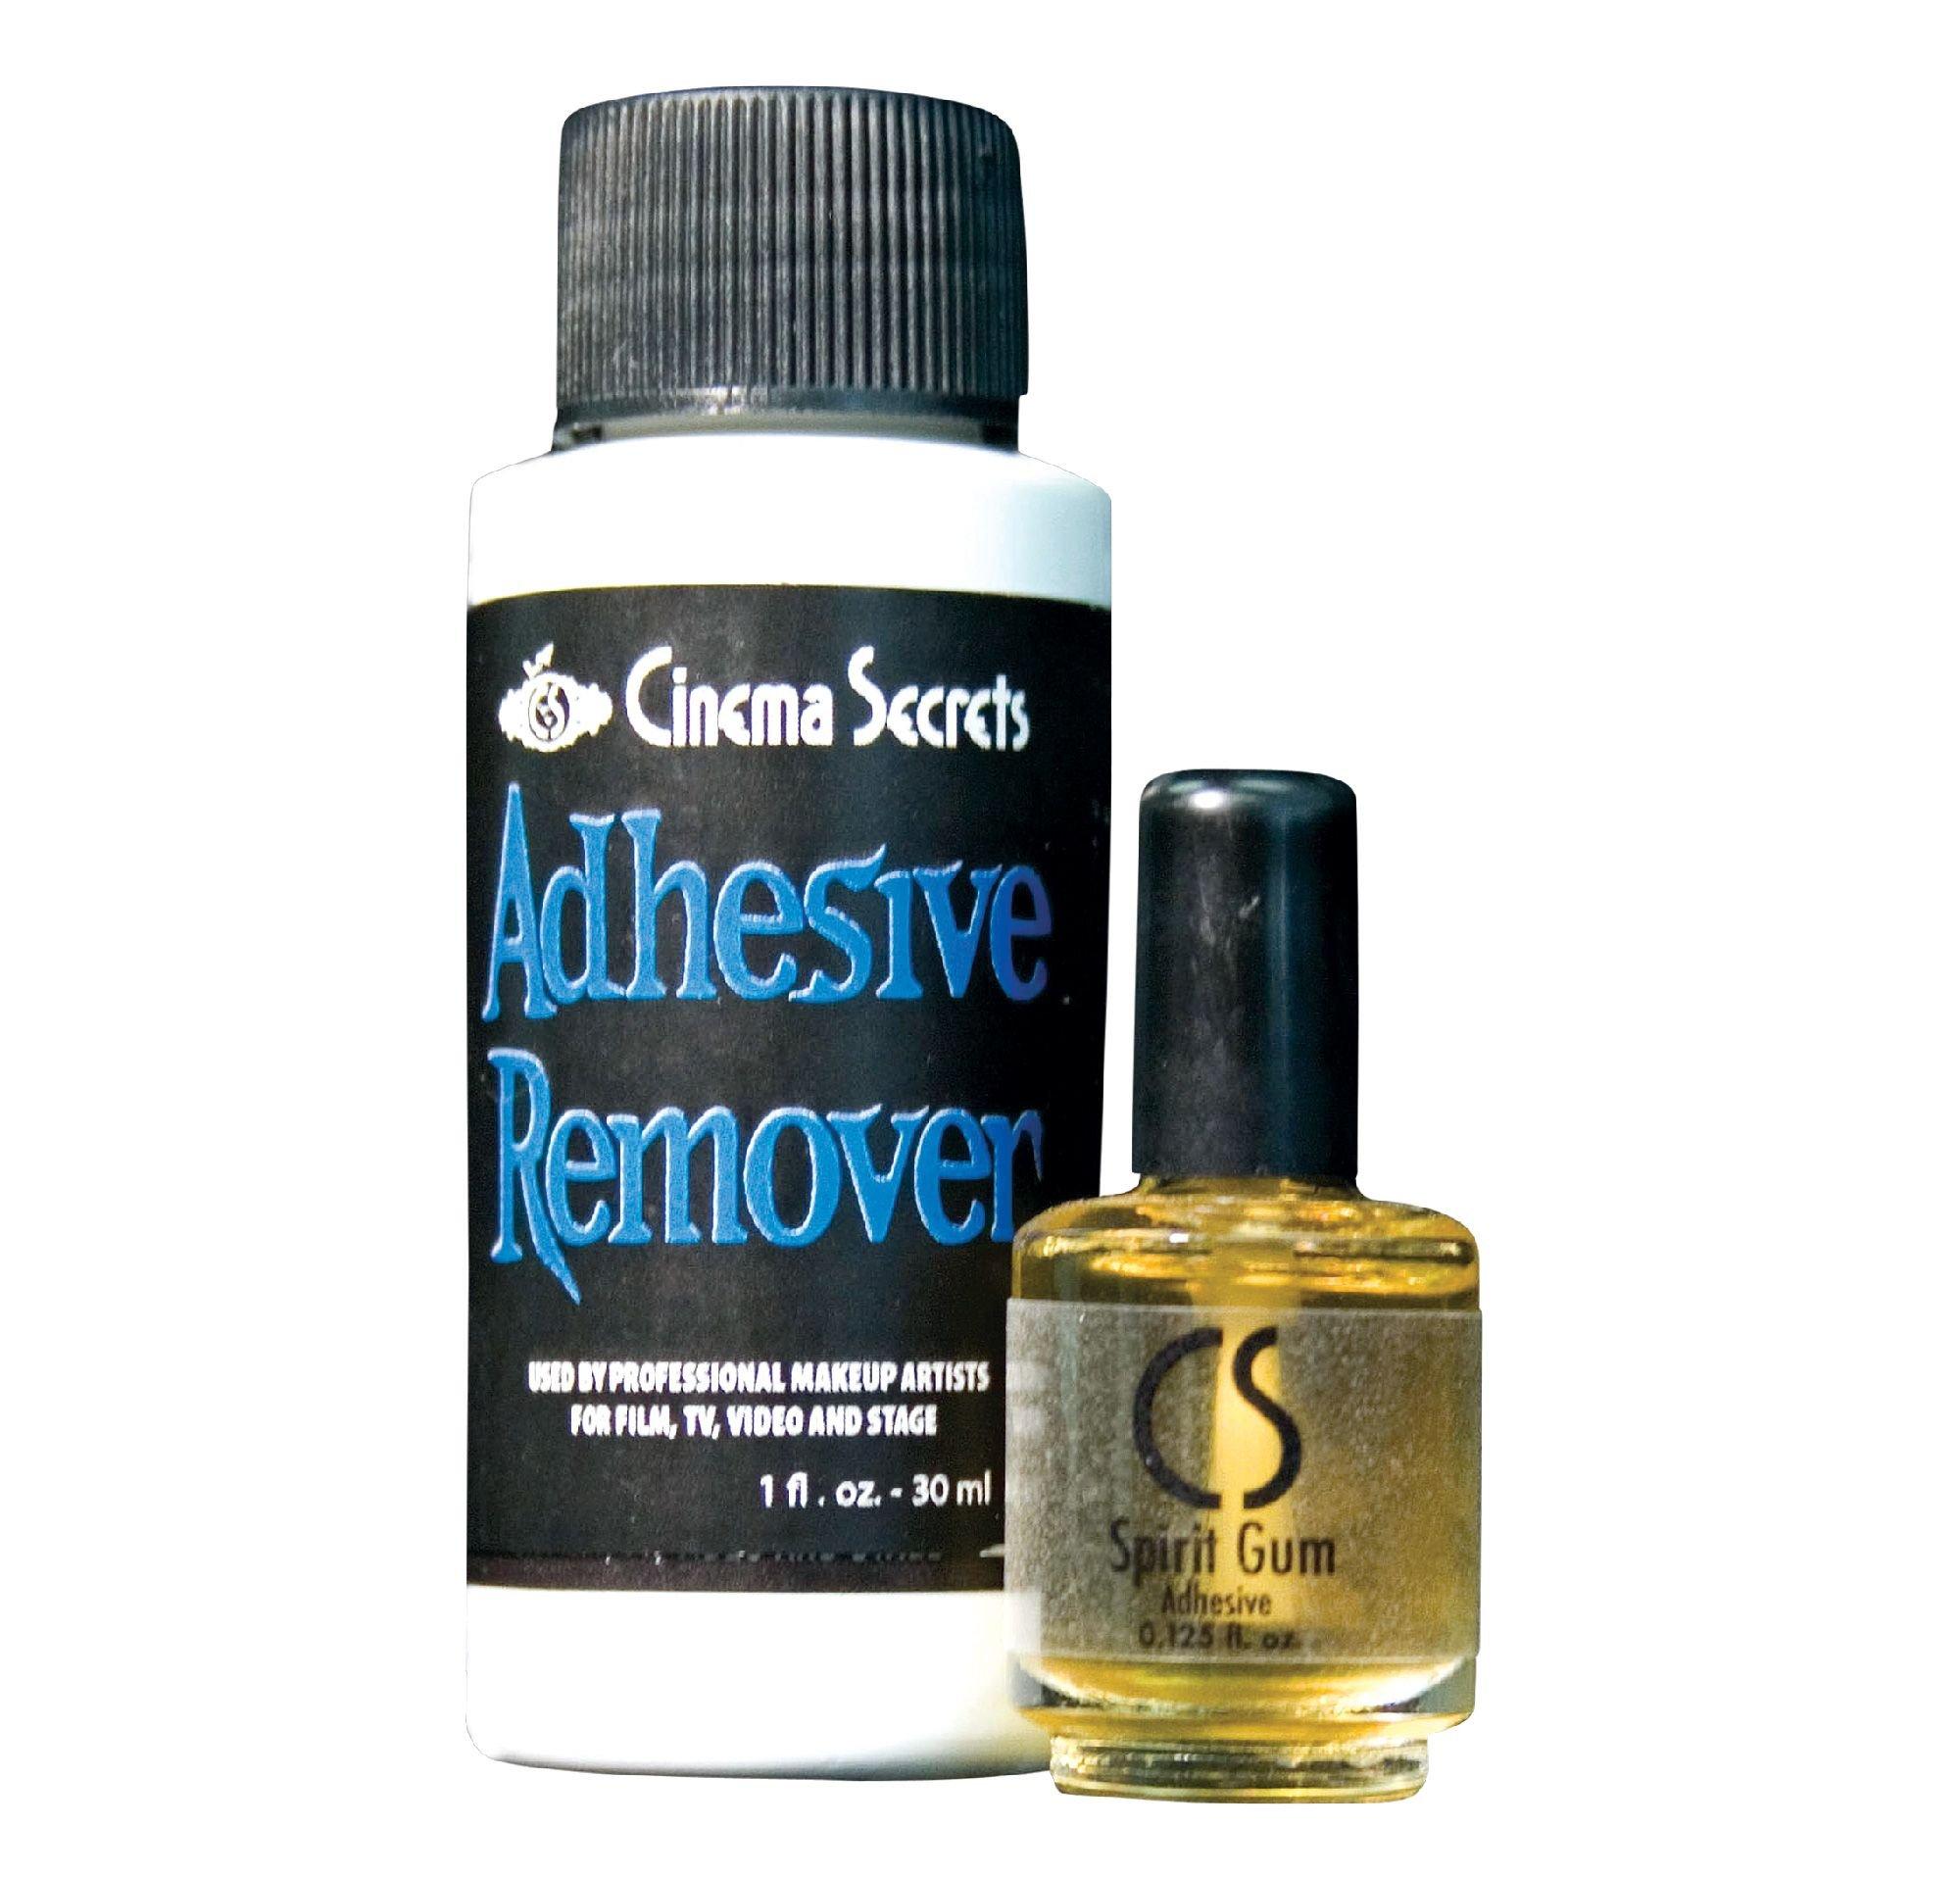 Spirit Gum Adhesive and Remover - Combo Pack of 0.5 Fl. Oz. Prosthetic Skin  Adhesive & 0.5 Fl. Oz Spirit Gum Remover 